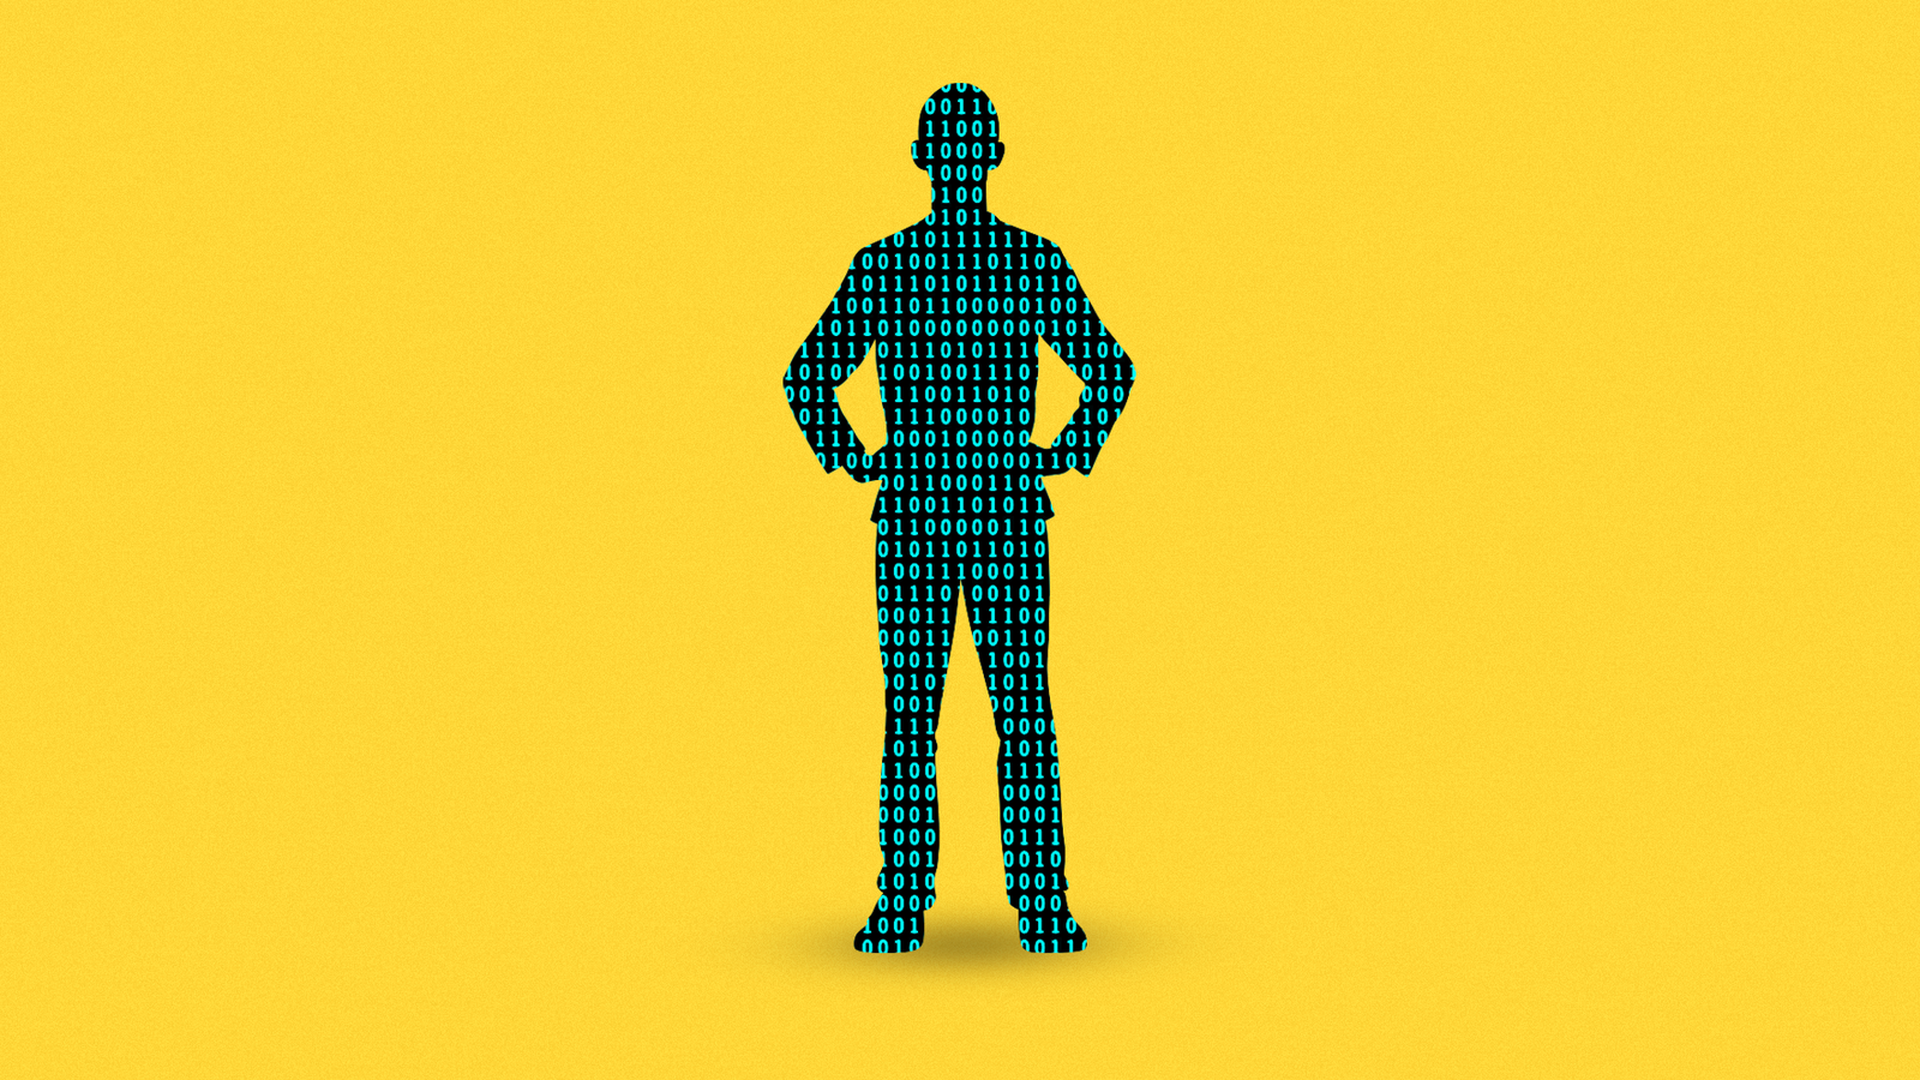 Illustration of a person's outline filled in with 1s and 0s, on a yellow background